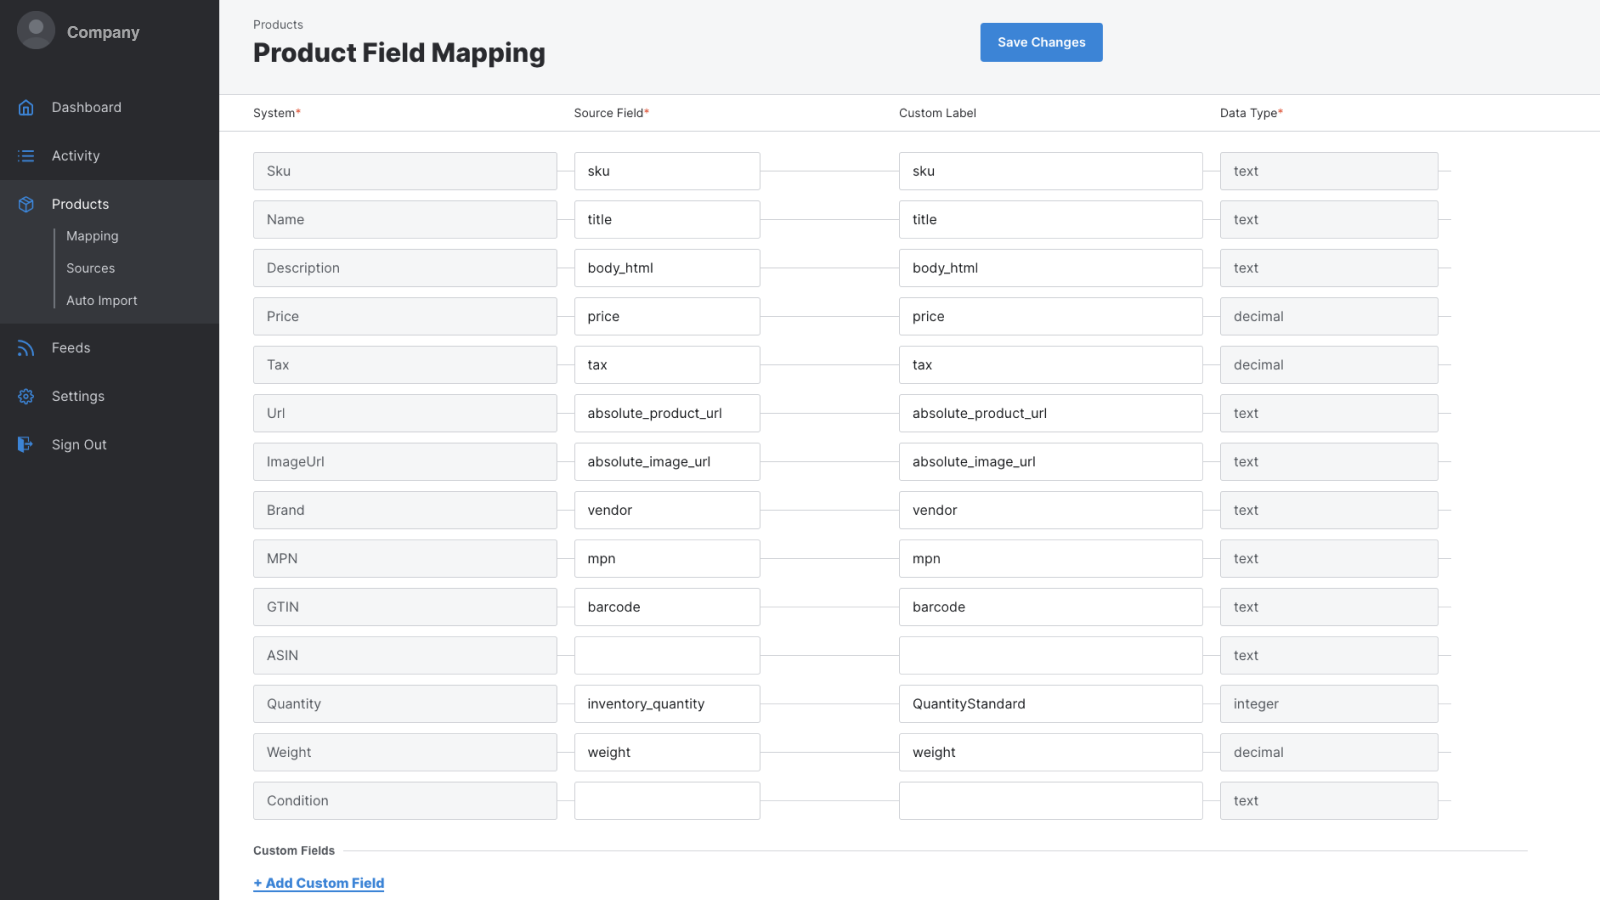 Configuring field mappings for products